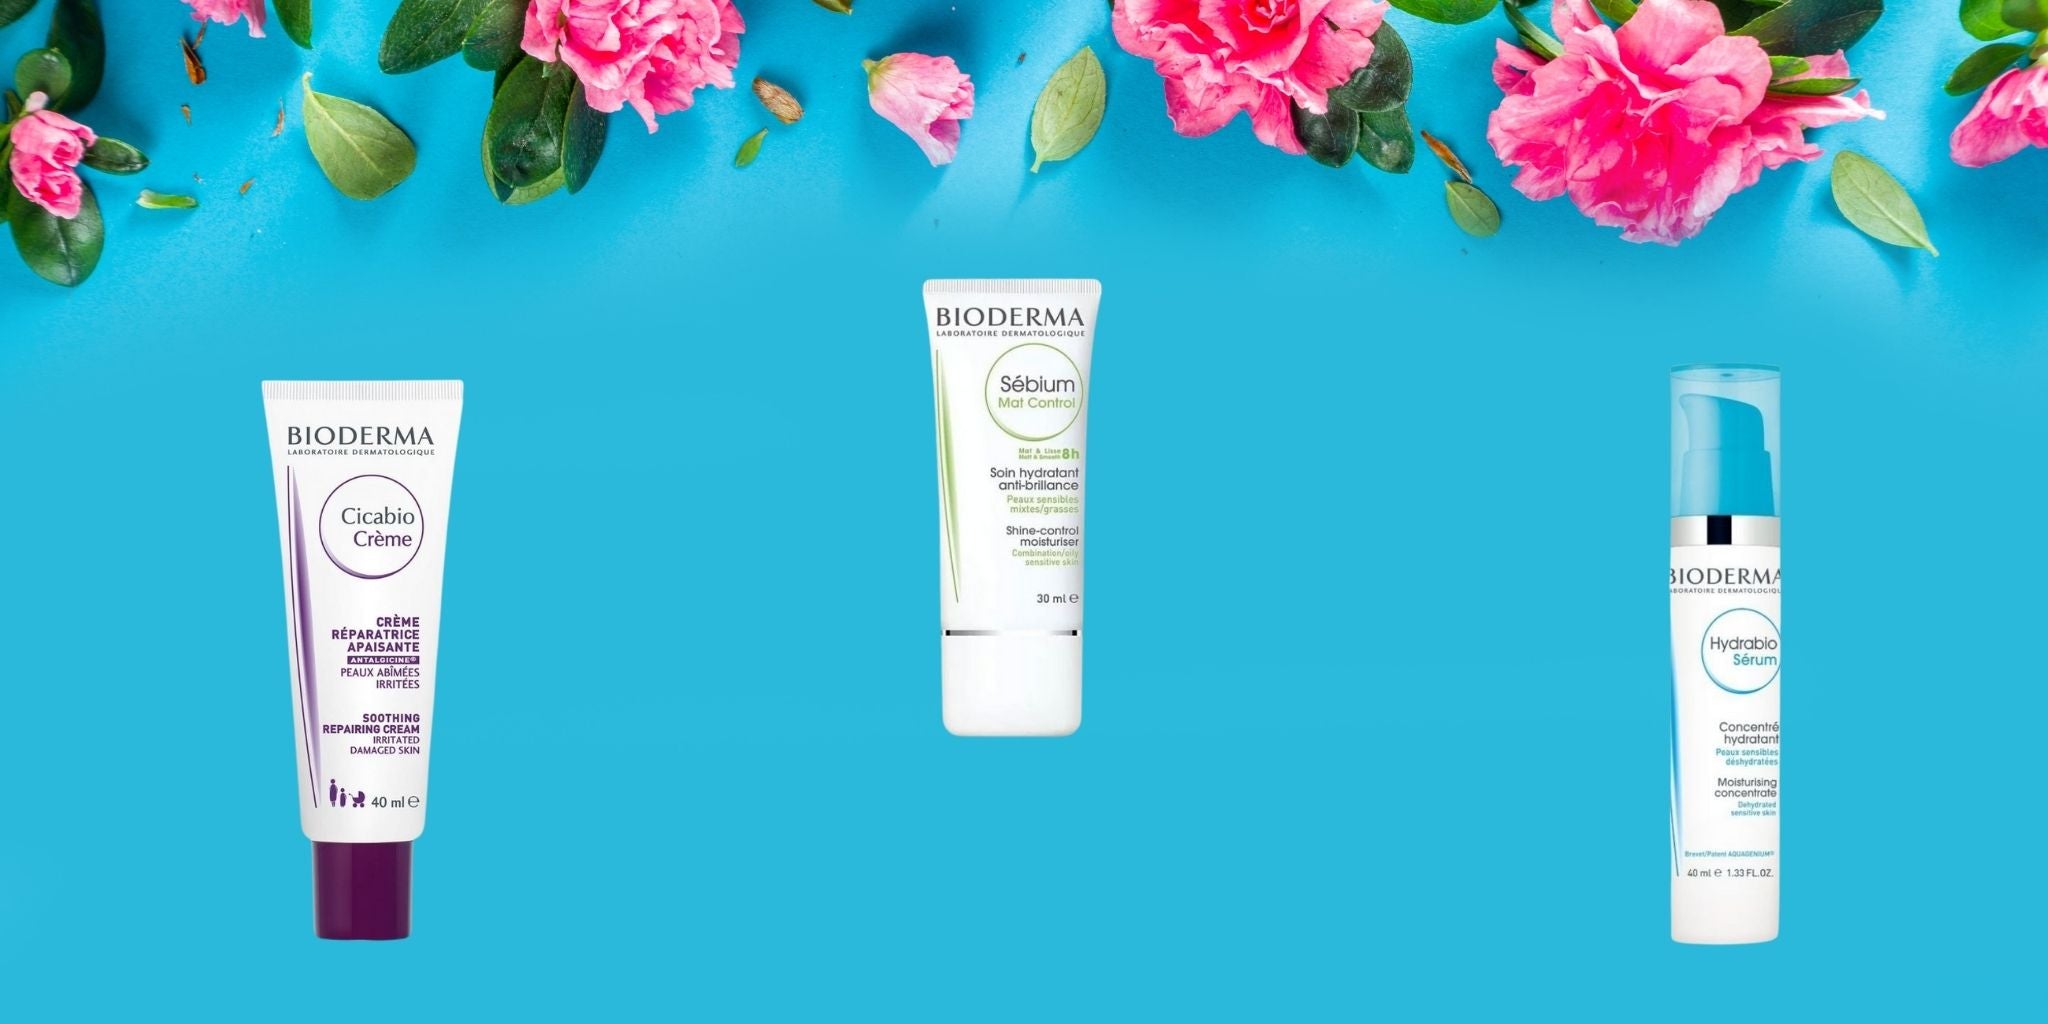 where to buy bioderma products